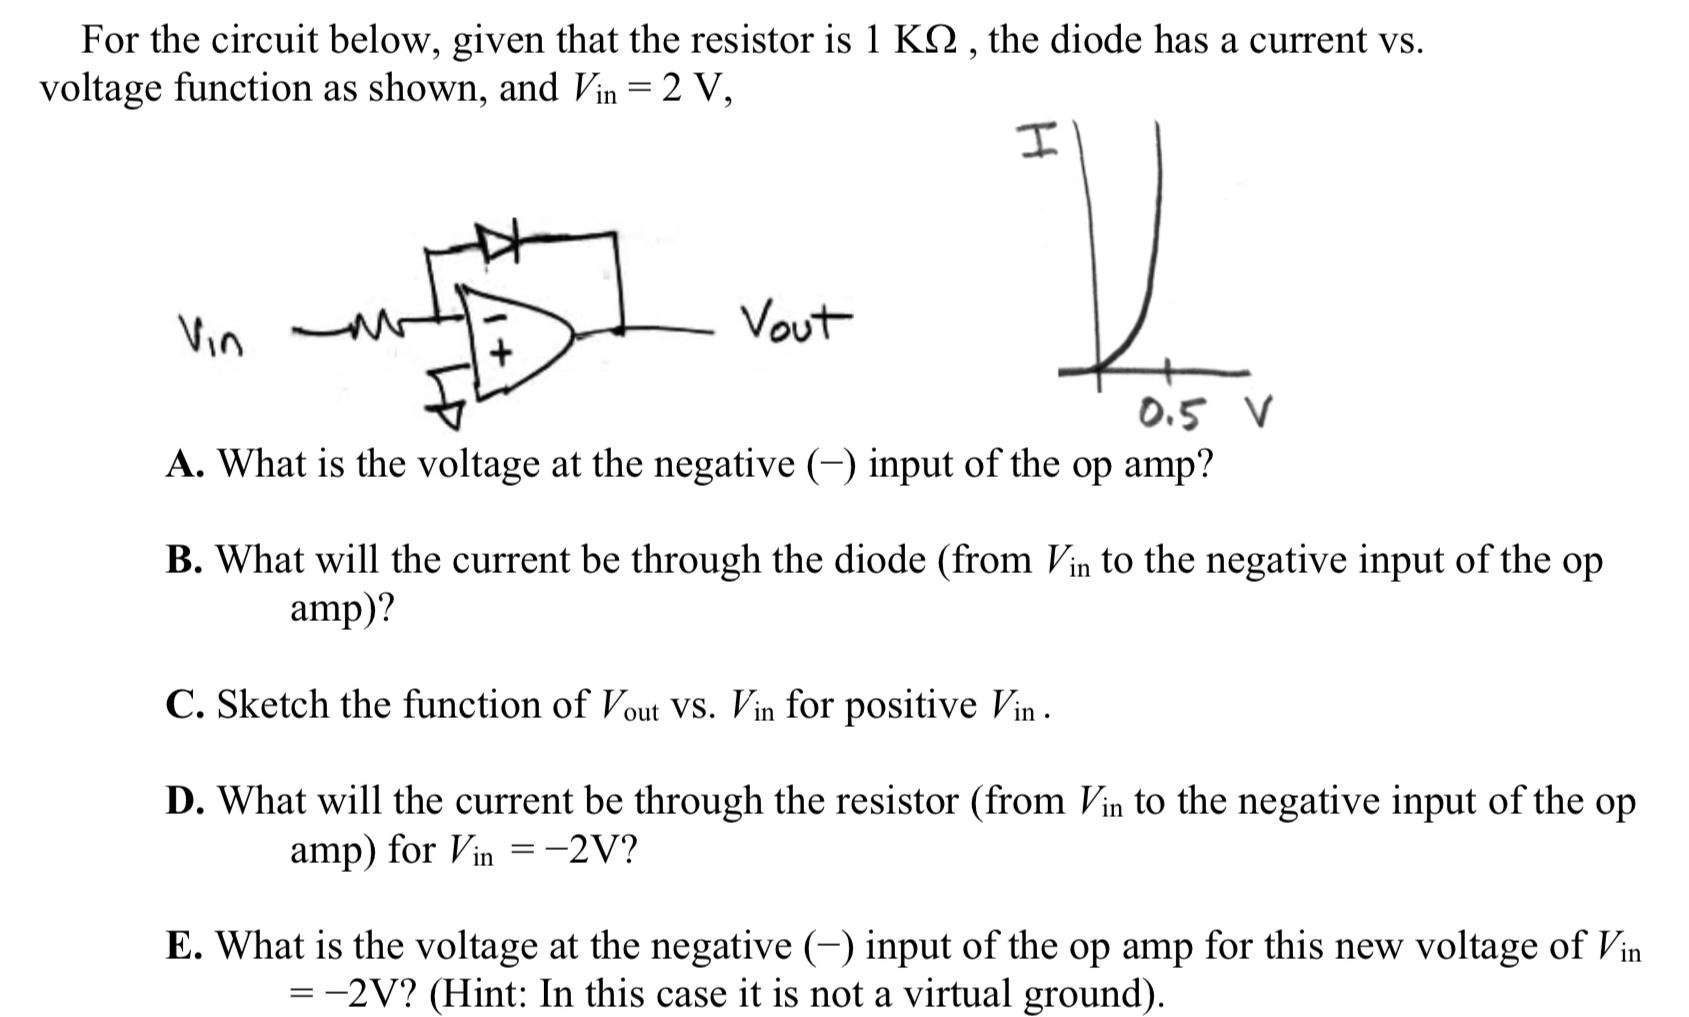 For the circuit below, given that the resistor is 1 K, the diode has a current vs. voltage function as shown,